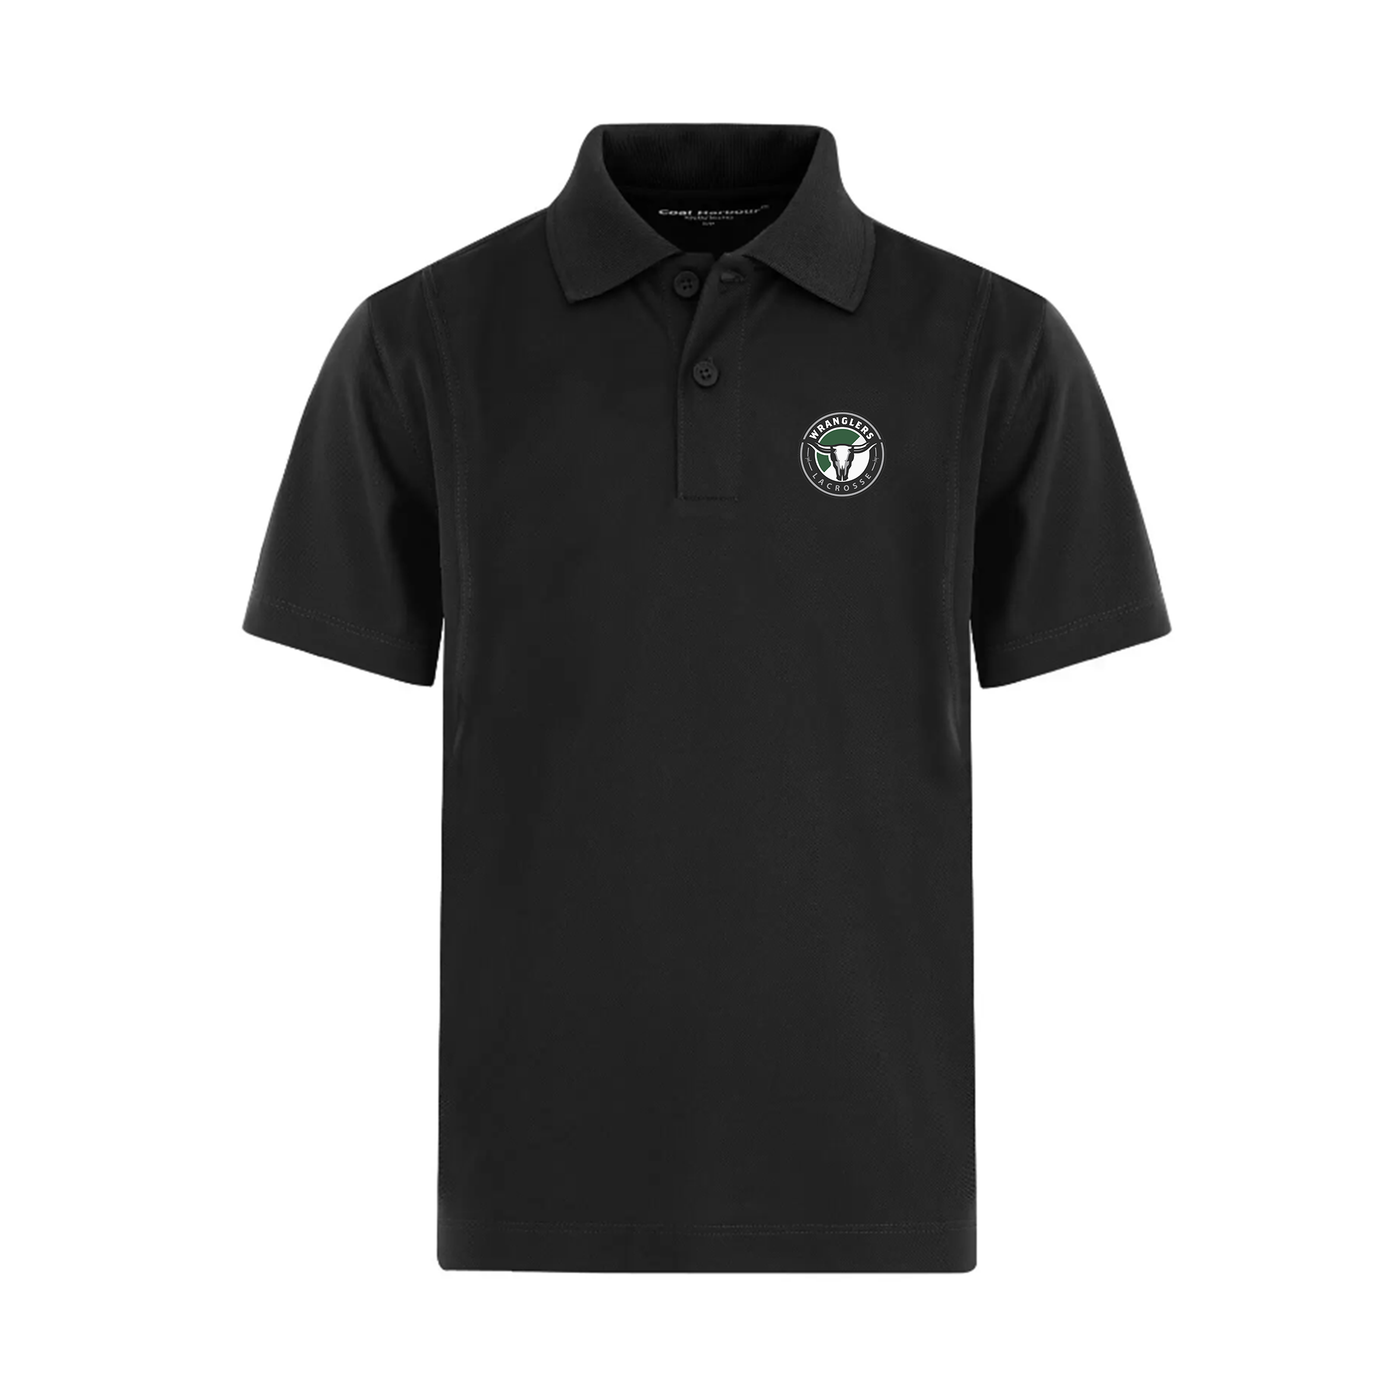 Snag Resistant Youth Polo - Wranglers